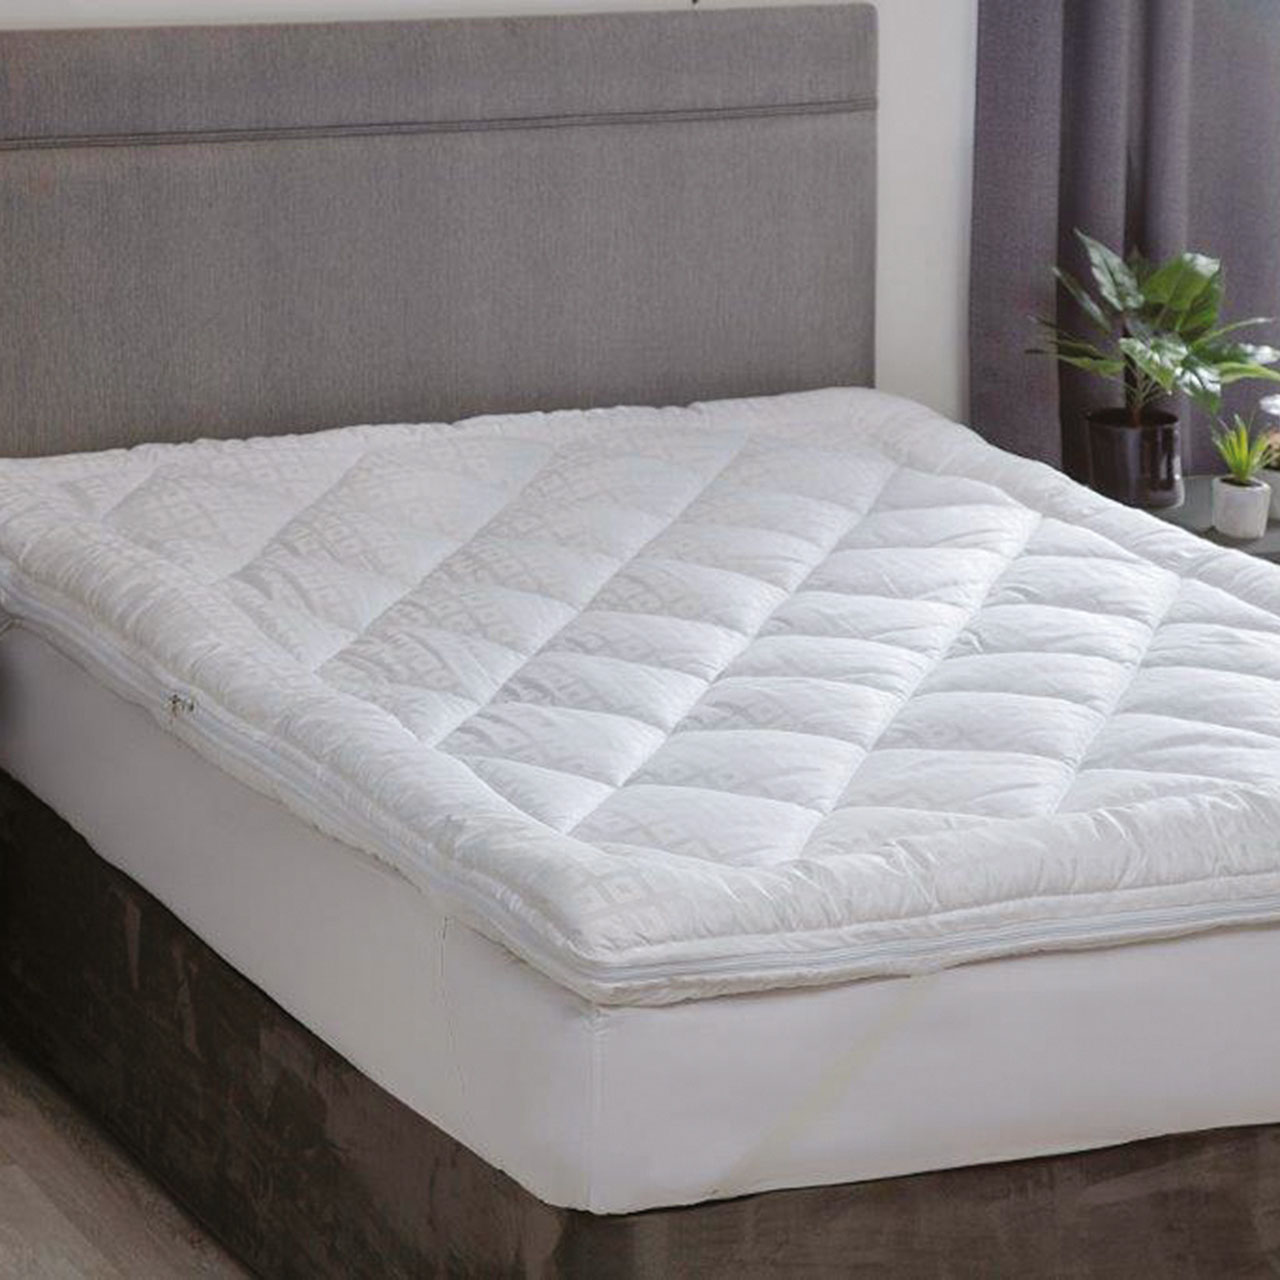 Super King, Hotel Collection Jacquard Mattress Topper